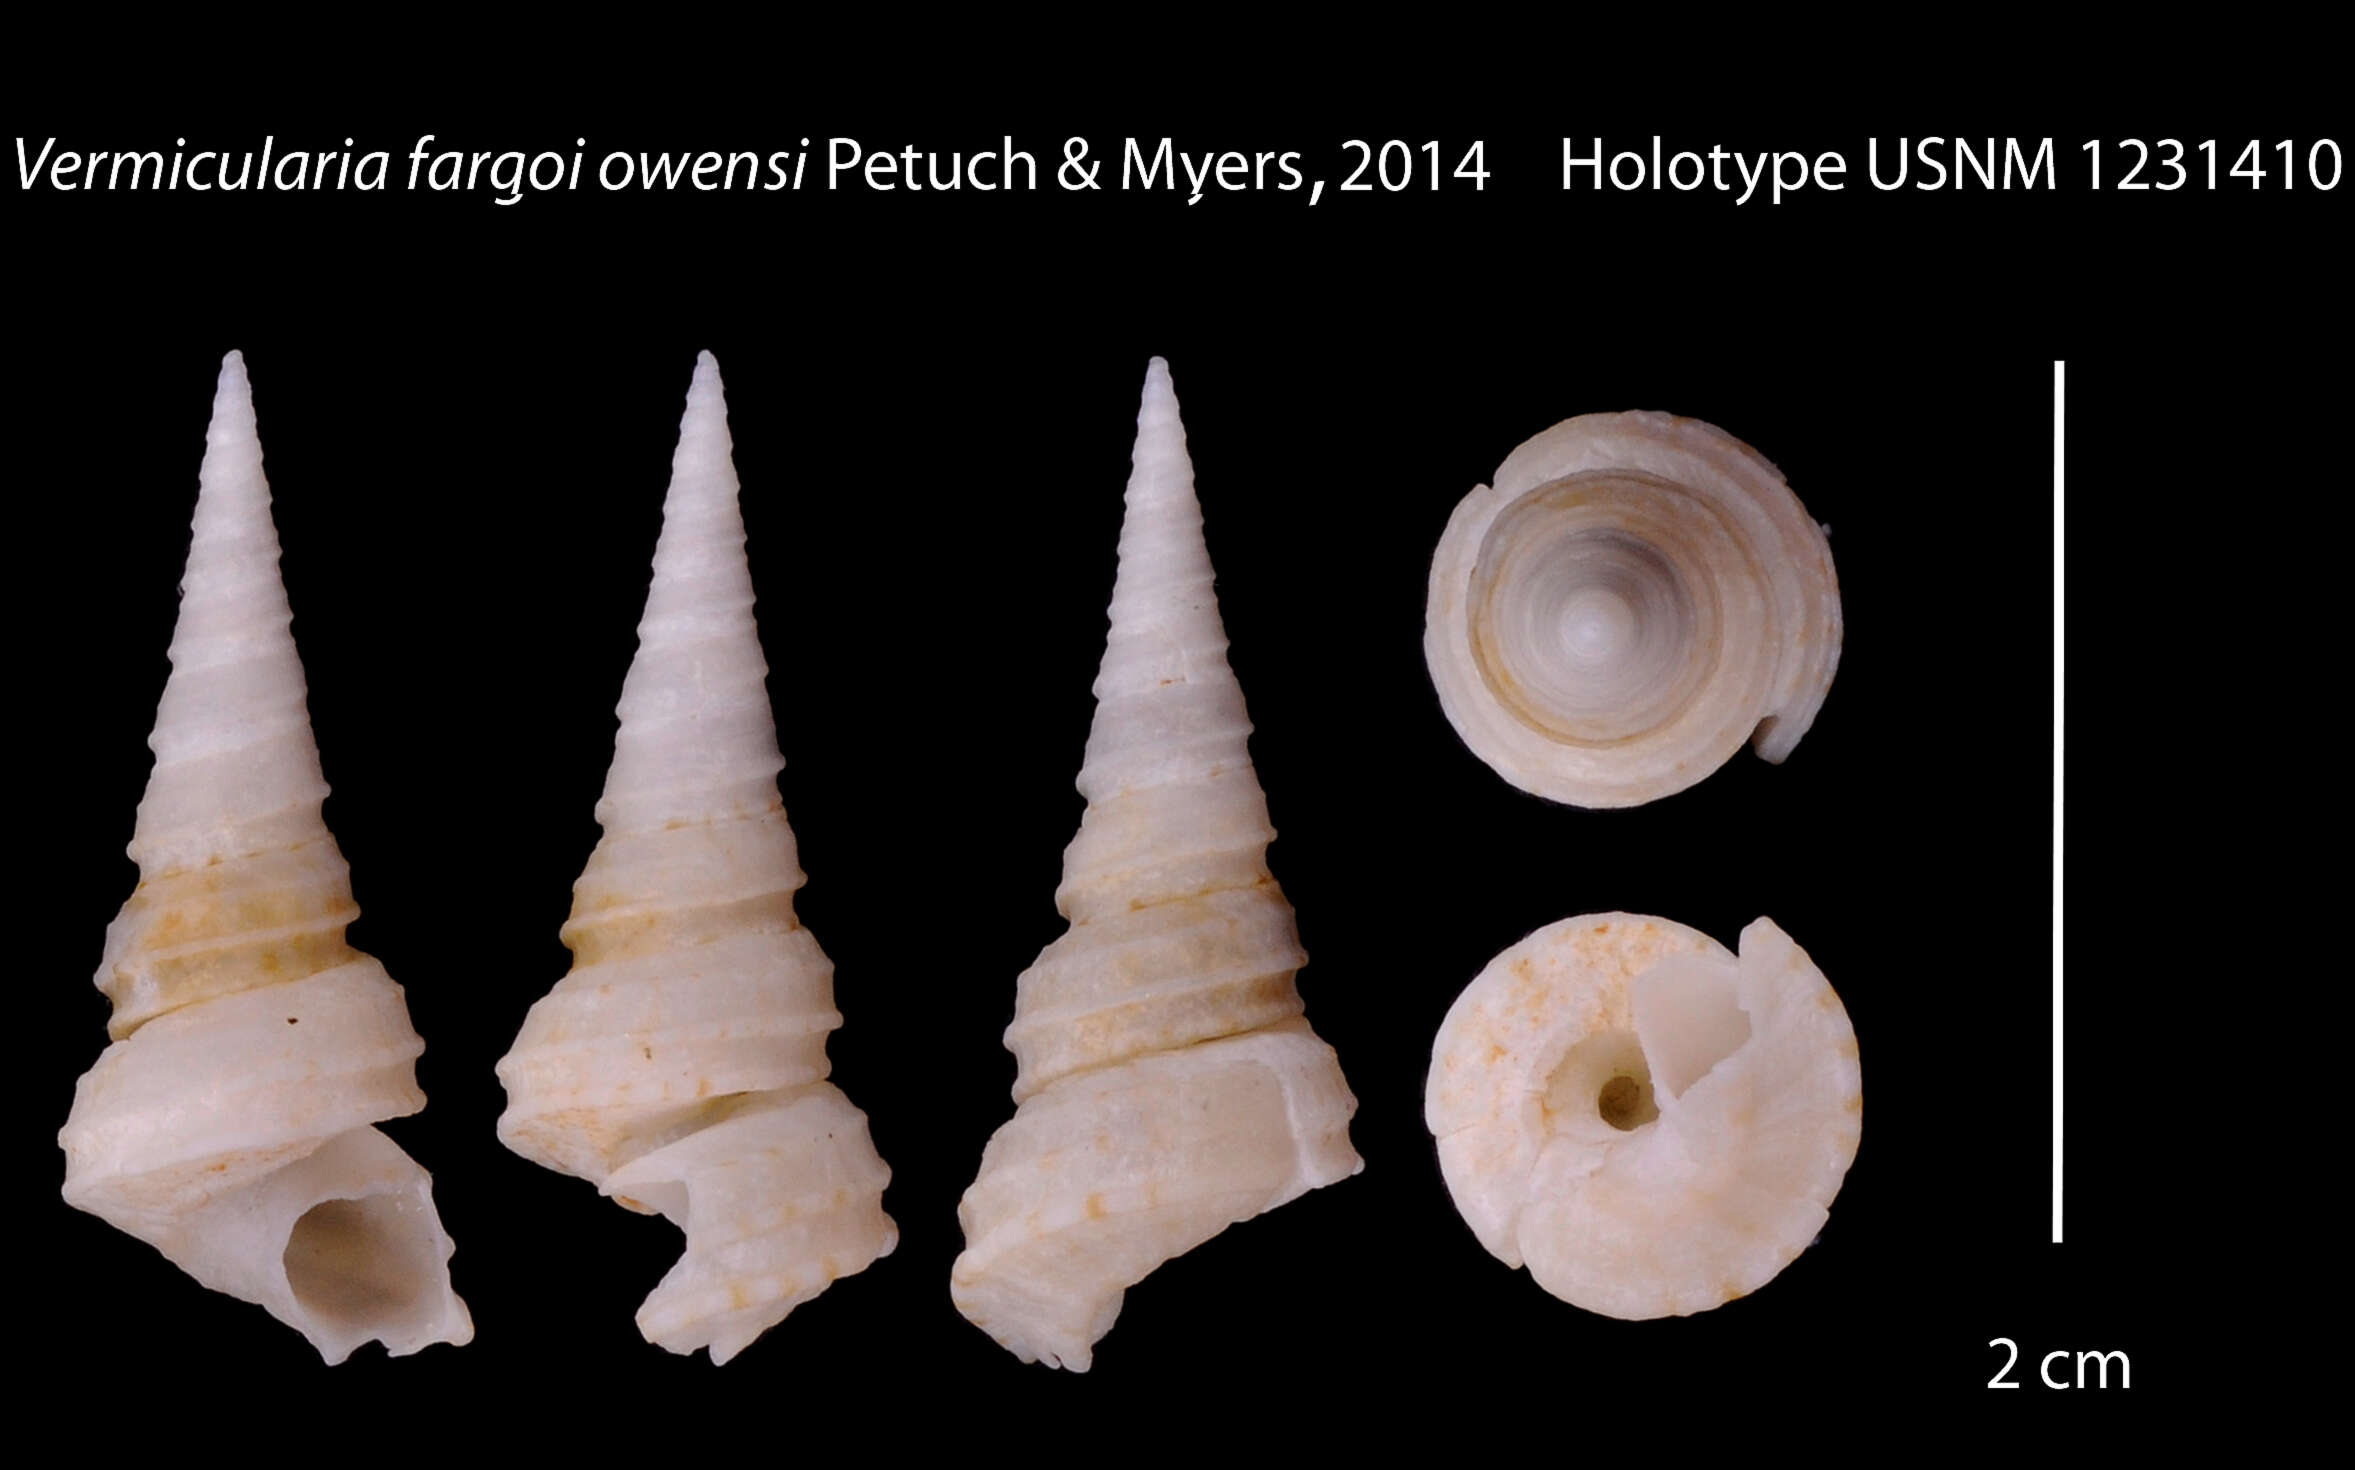 Image of Vermicularia fargoi owensi Petuch & R. F. Myers 2014